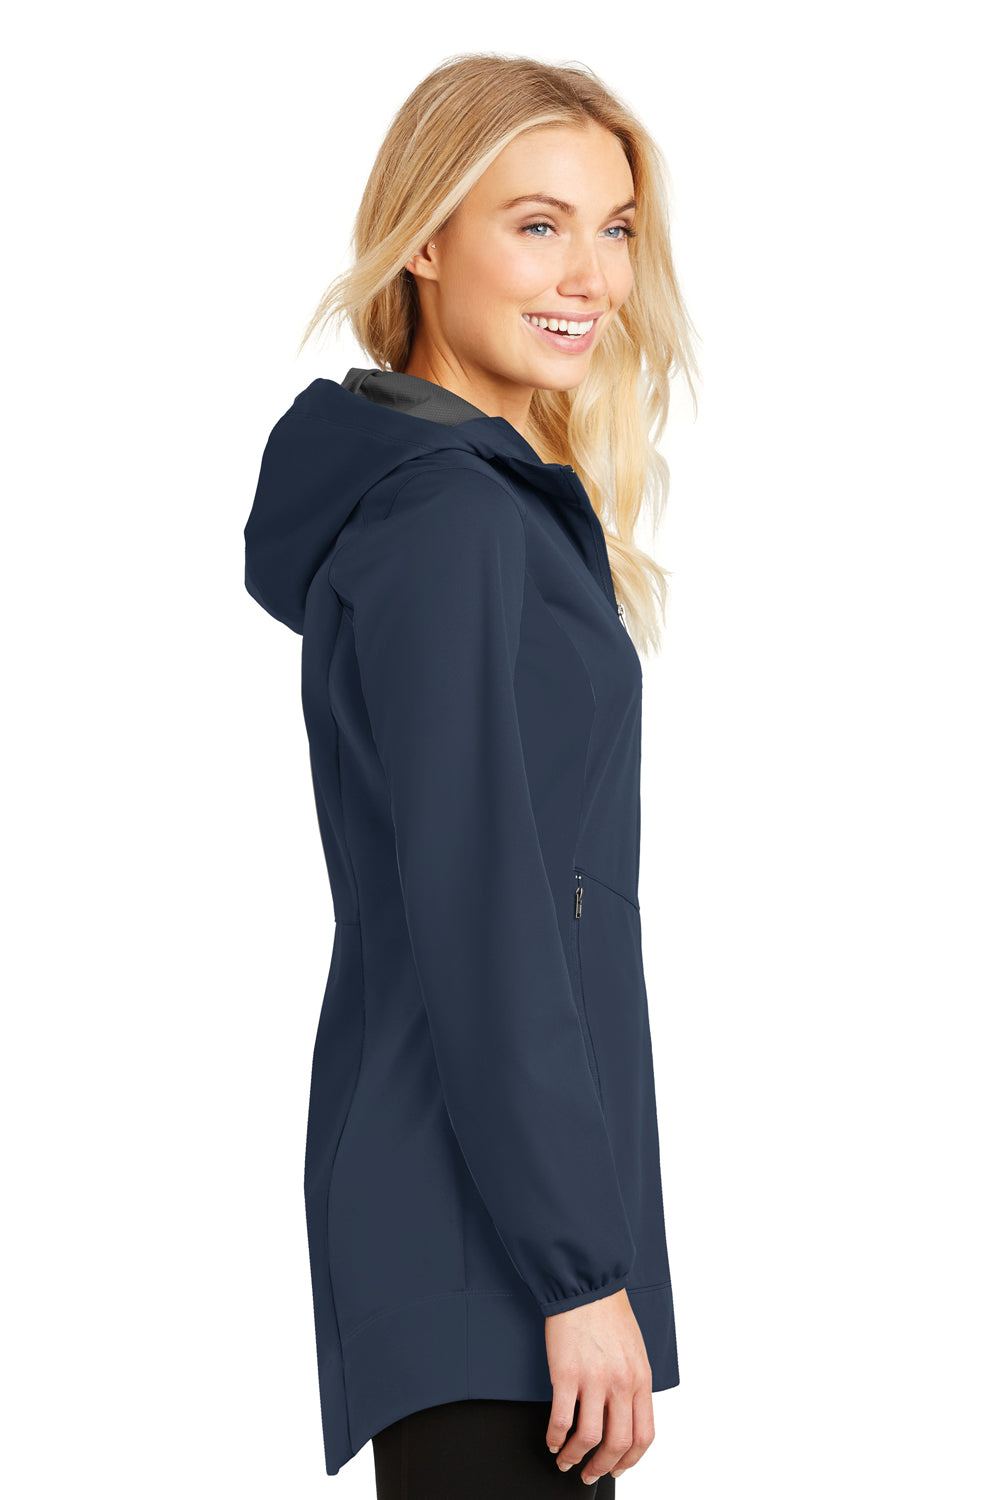 Port Authority L719 Womens Active Wind & Water Resistant Full Zip Hooded Jacket Navy Blue Side